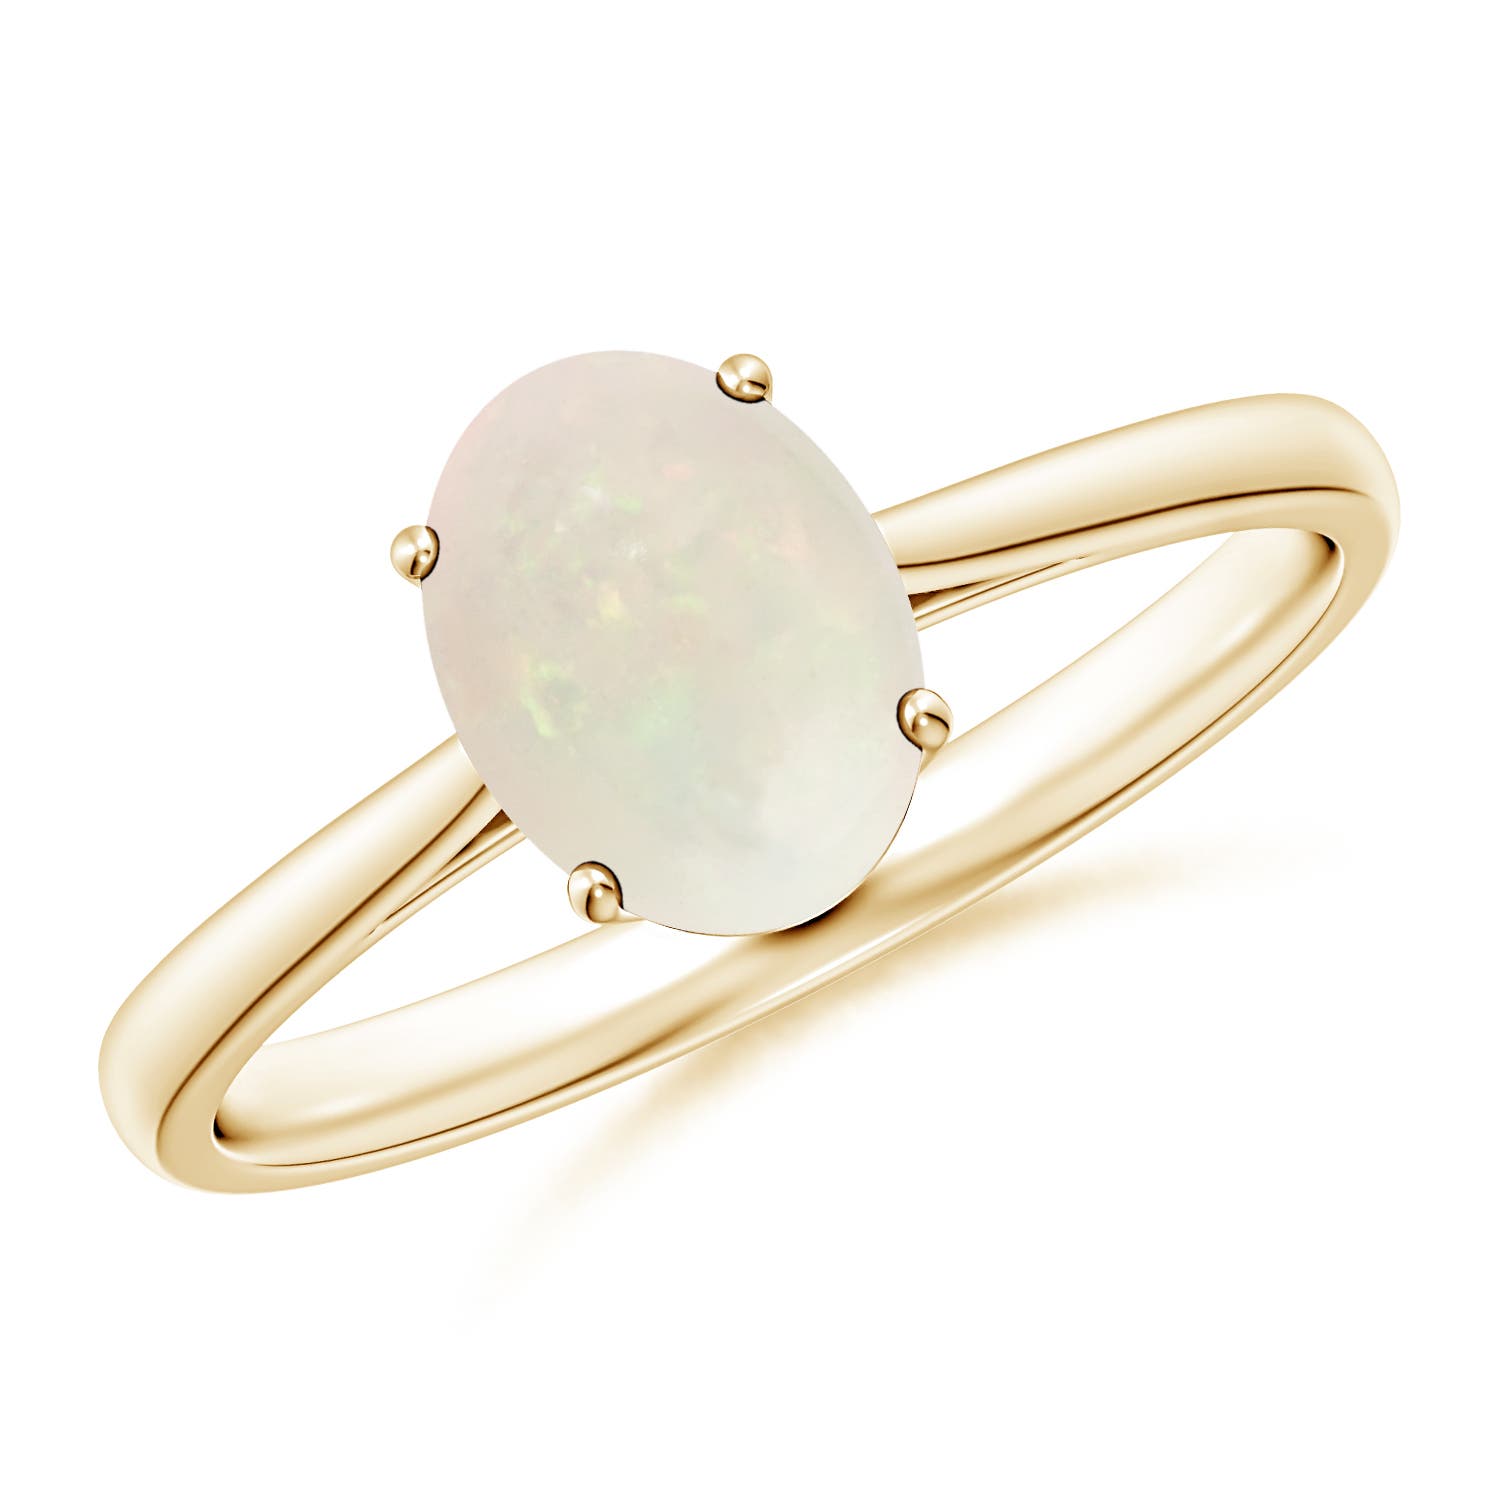 A - Opal / 0.8 CT / 14 KT Yellow Gold